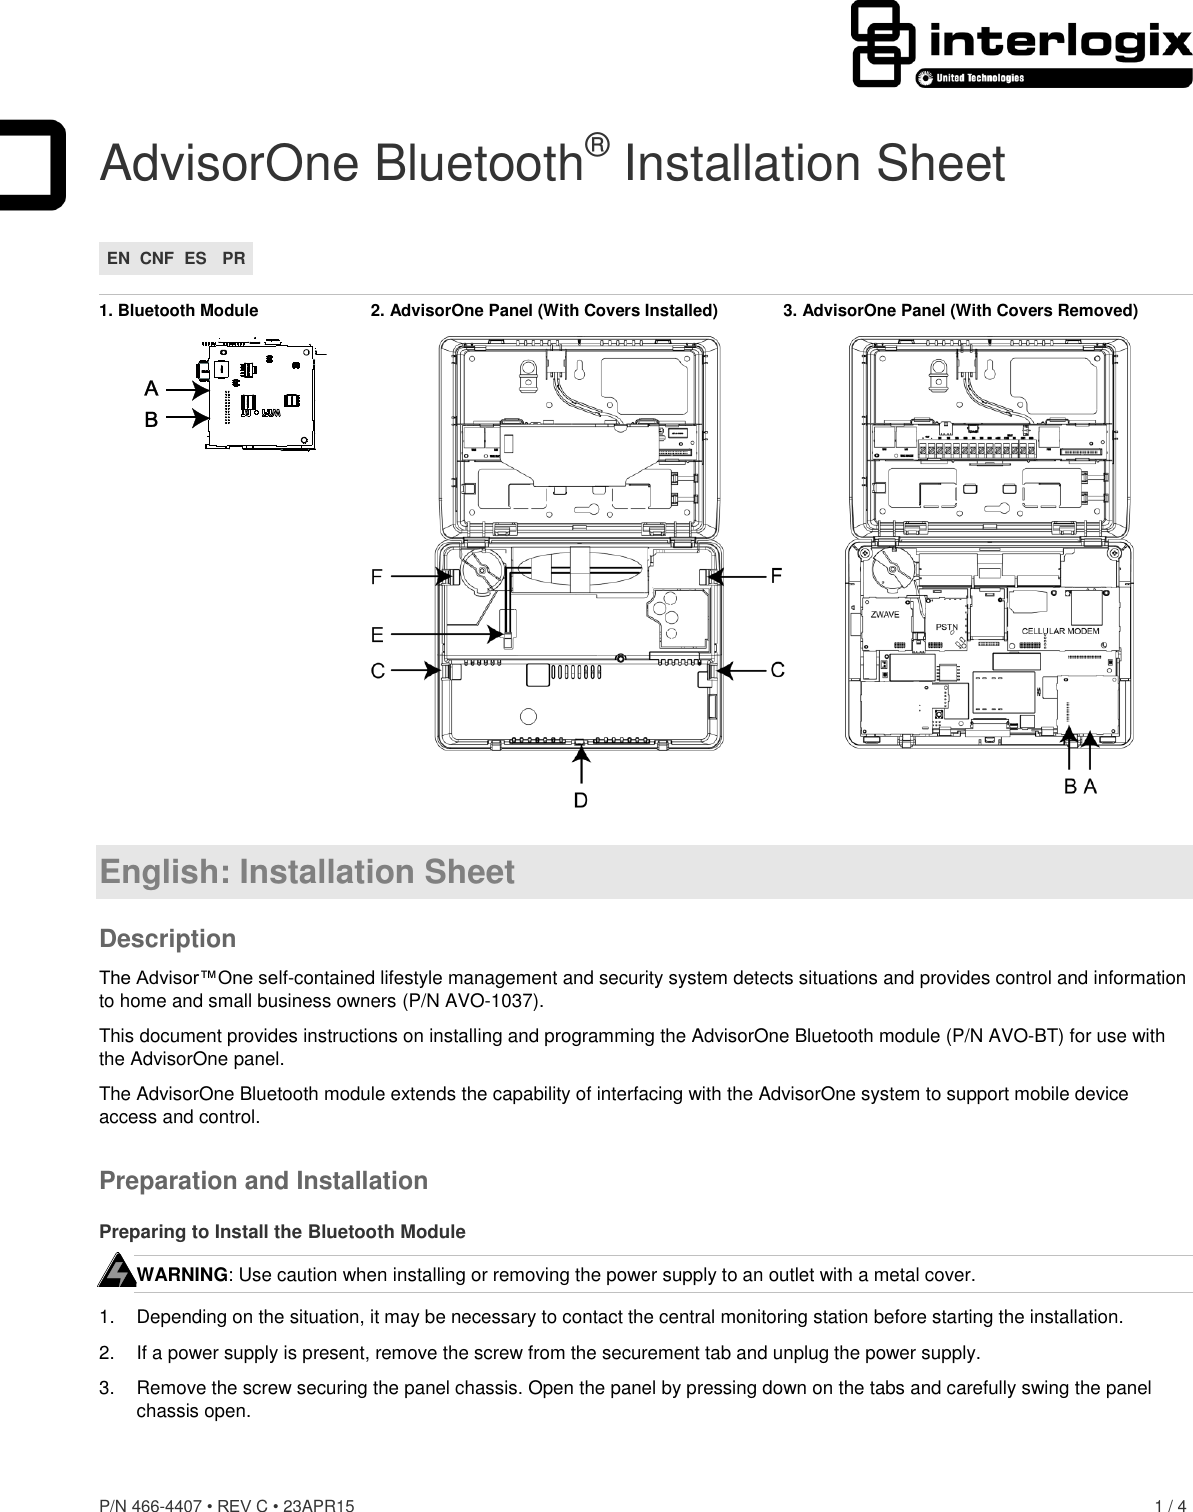 P/N 466-4407 • REV C • 23APR15    1 / 4  AdvisorOne Bluetooth® Installation Sheet EN CNF ES PR  1. Bluetooth Module  2. AdvisorOne Panel (With Covers Installed)  3. AdvisorOne Panel (With Covers Removed)   English: Installation Sheet Description The Advisor™One self-contained lifestyle management and security system detects situations and provides control and information to home and small business owners (P/N AVO-1037). This document provides instructions on installing and programming the AdvisorOne Bluetooth module (P/N AVO-BT) for use with the AdvisorOne panel. The AdvisorOne Bluetooth module extends the capability of interfacing with the AdvisorOne system to support mobile device access and control. Preparation and Installation Preparing to Install the Bluetooth Module WARNING: Use caution when installing or removing the power supply to an outlet with a metal cover. 1.  Depending on the situation, it may be necessary to contact the central monitoring station before starting the installation. 2.  If a power supply is present, remove the screw from the securement tab and unplug the power supply. 3.  Remove the screw securing the panel chassis. Open the panel by pressing down on the tabs and carefully swing the panel chassis open.  